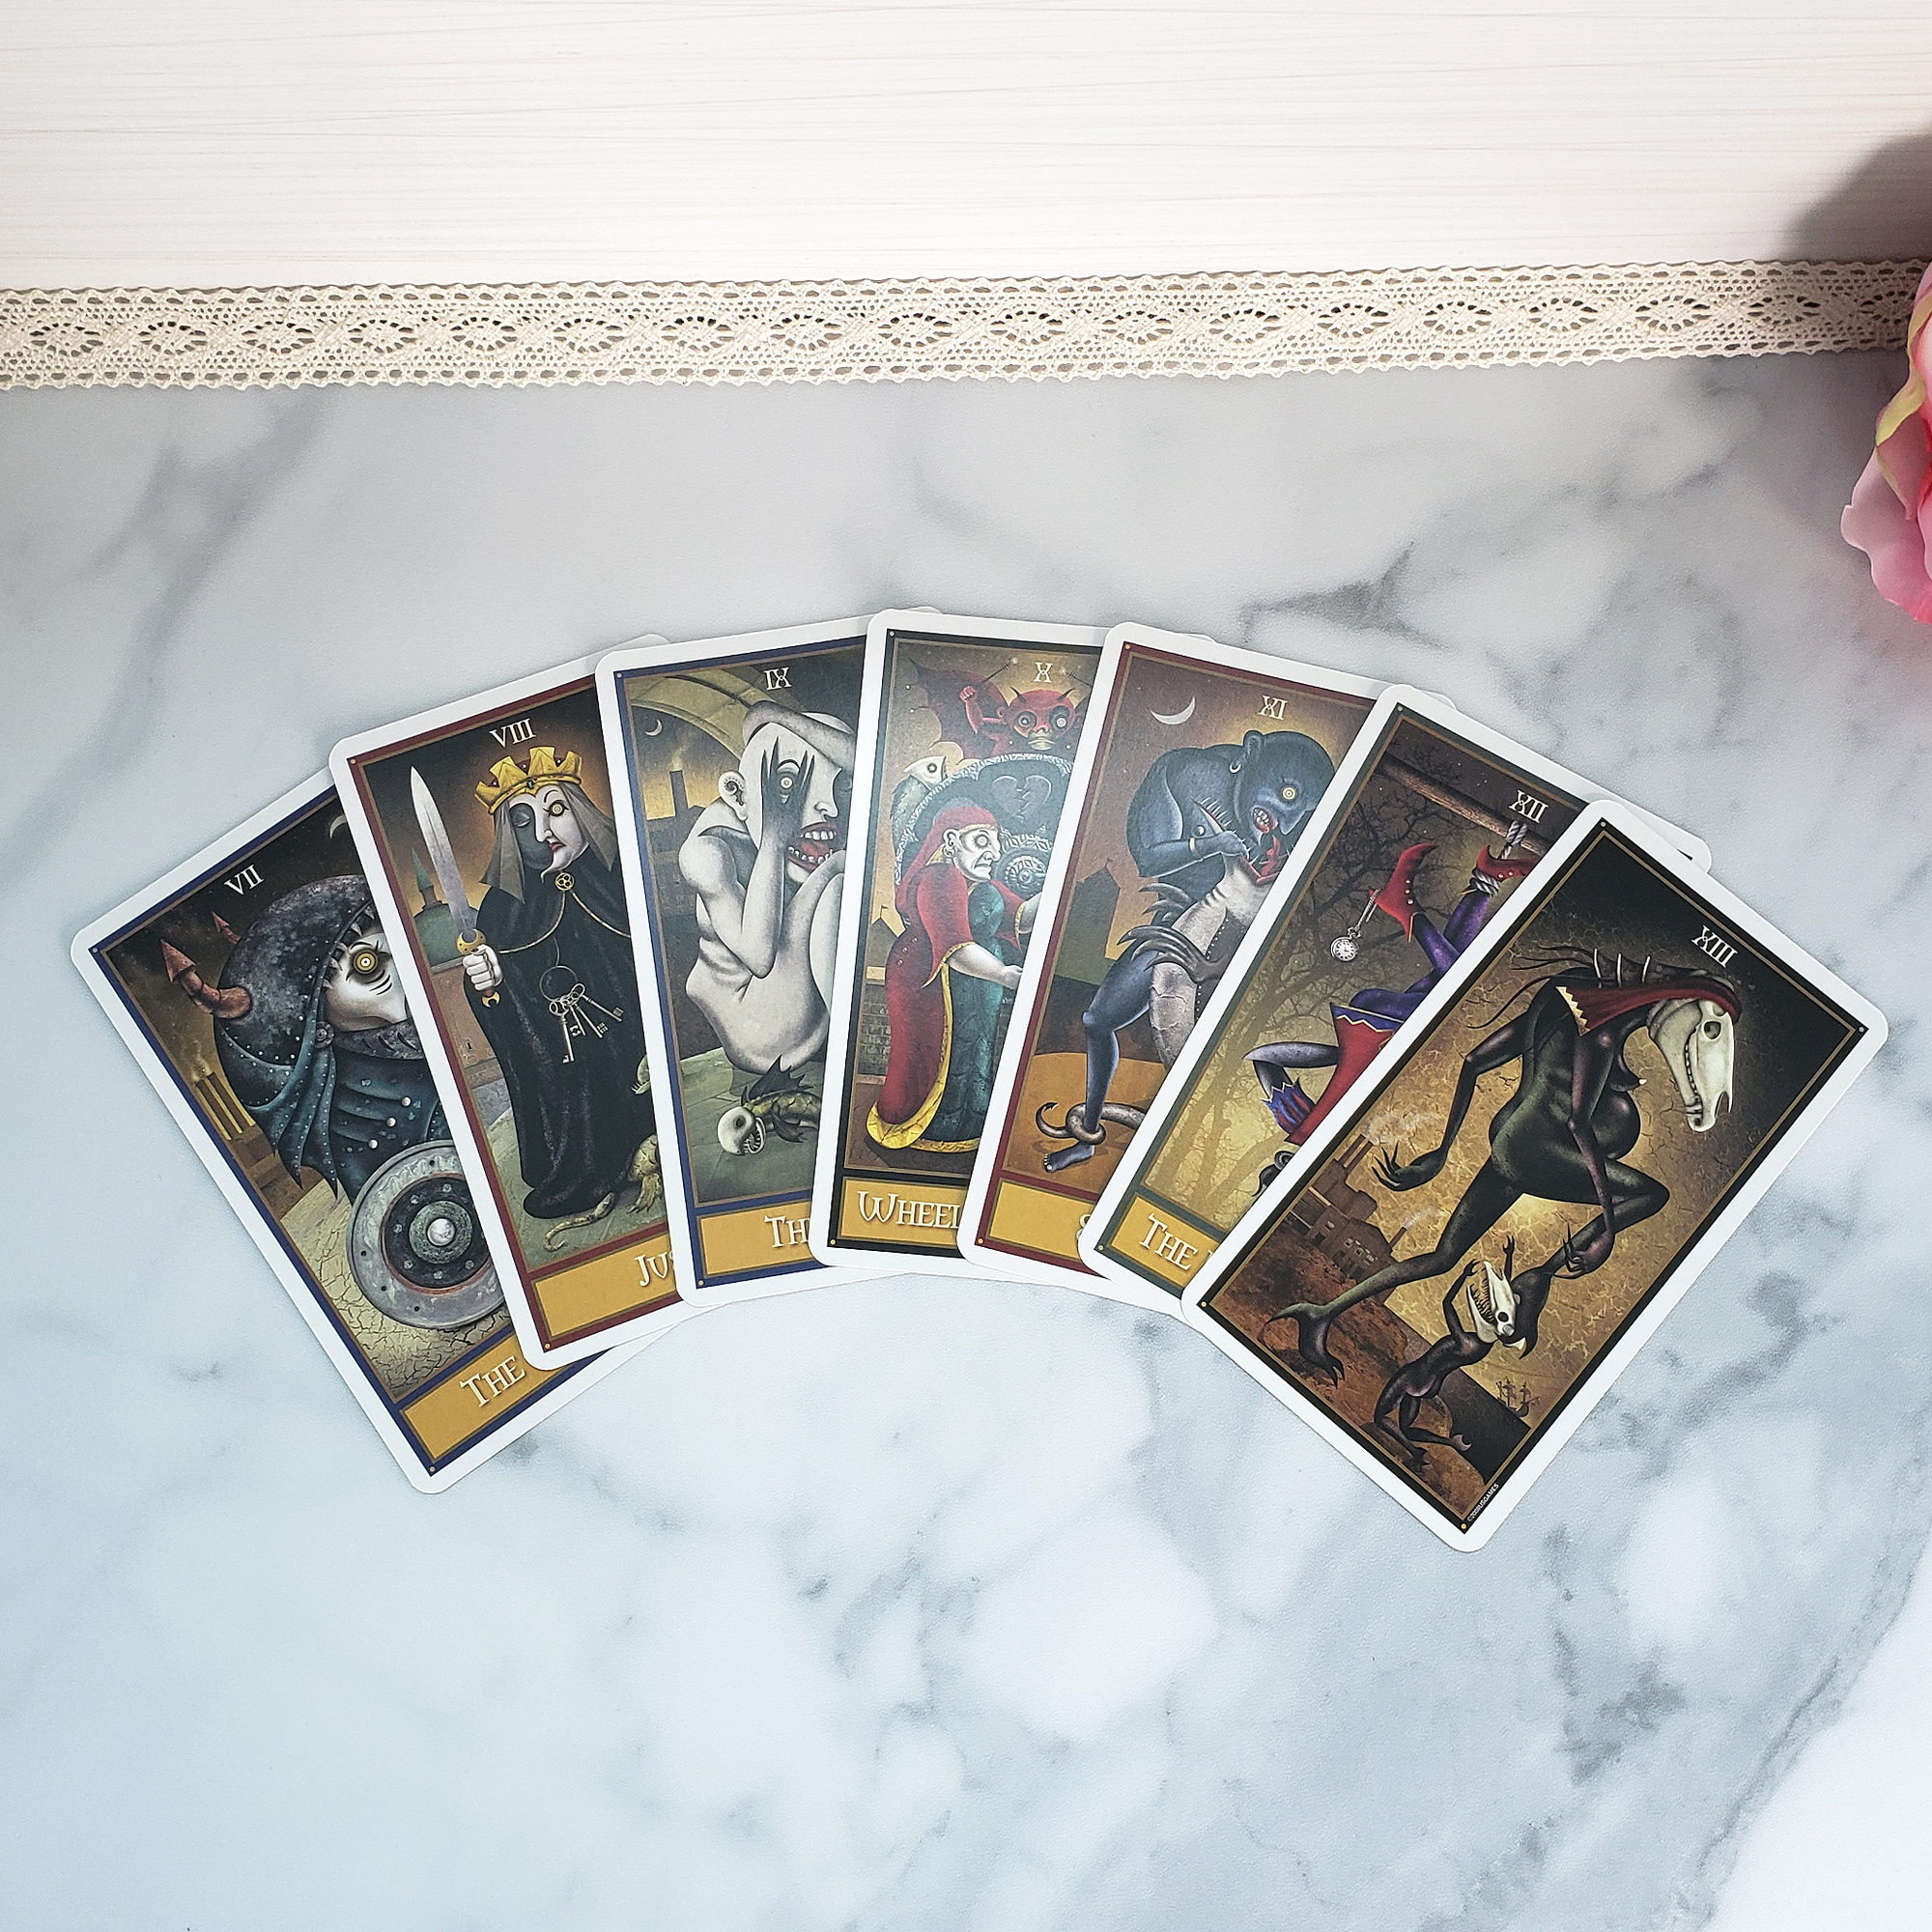 Deviant Moon Tarot Deck | Set of Tarot Cards | Divination Tool - Major Arcana from the Chariot to Death 